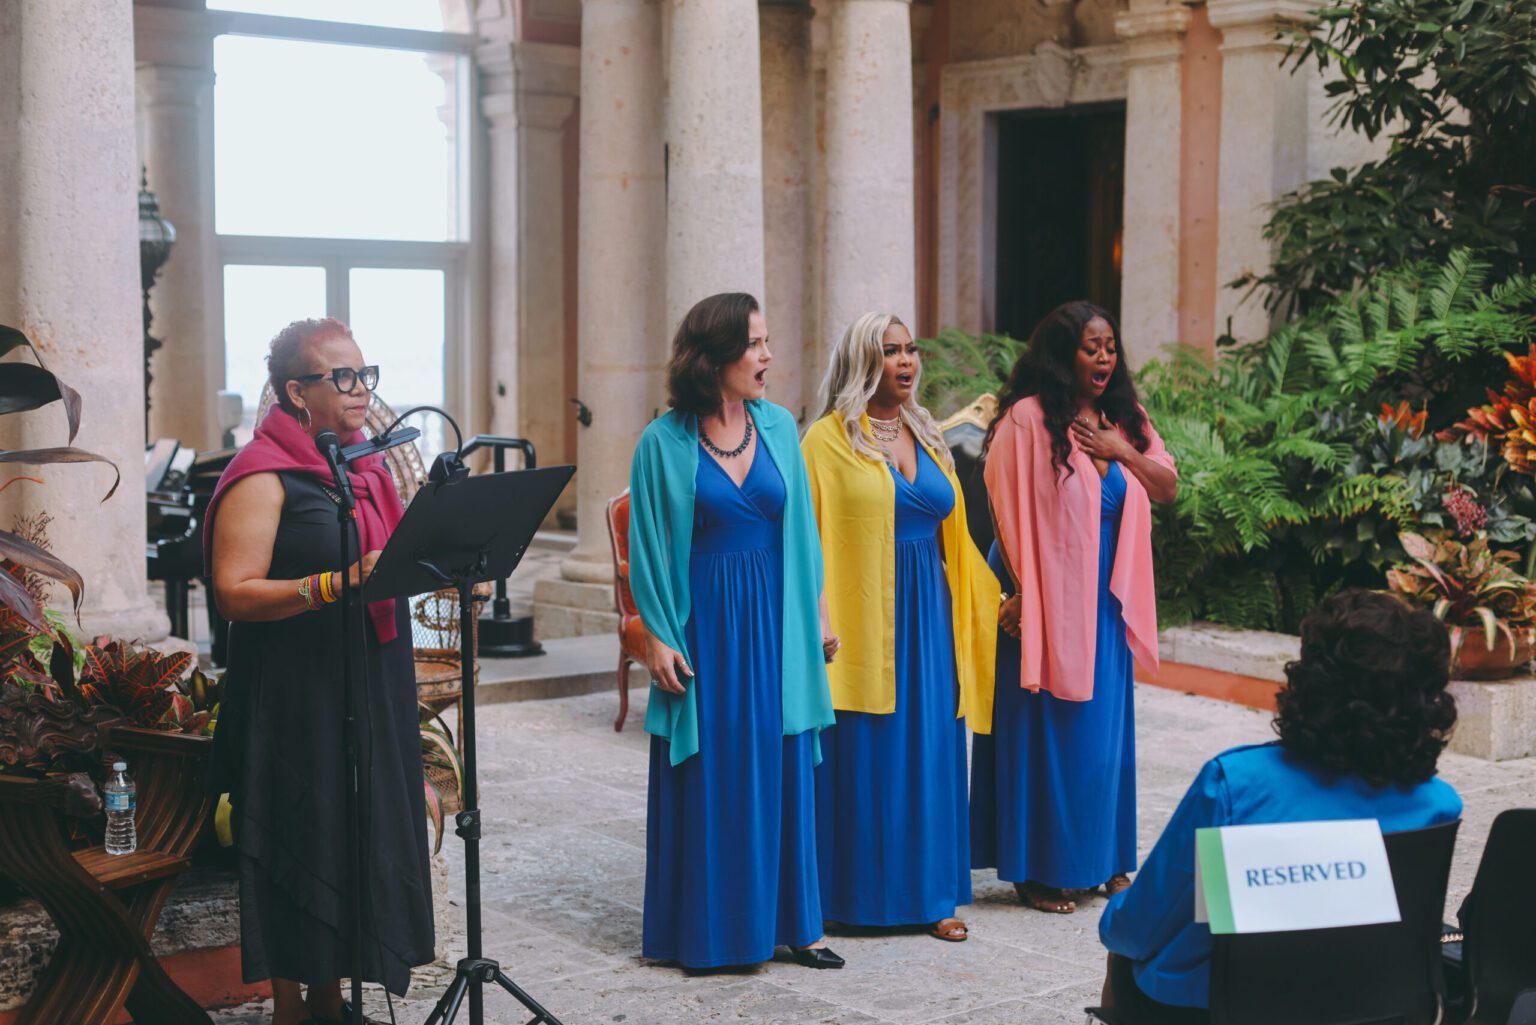 One woman at a microphone doing dramatic reading. Three women in blue dresses and three different colored scarfs singing. All in the Courtyard of Vizcaya Museum and Gardens